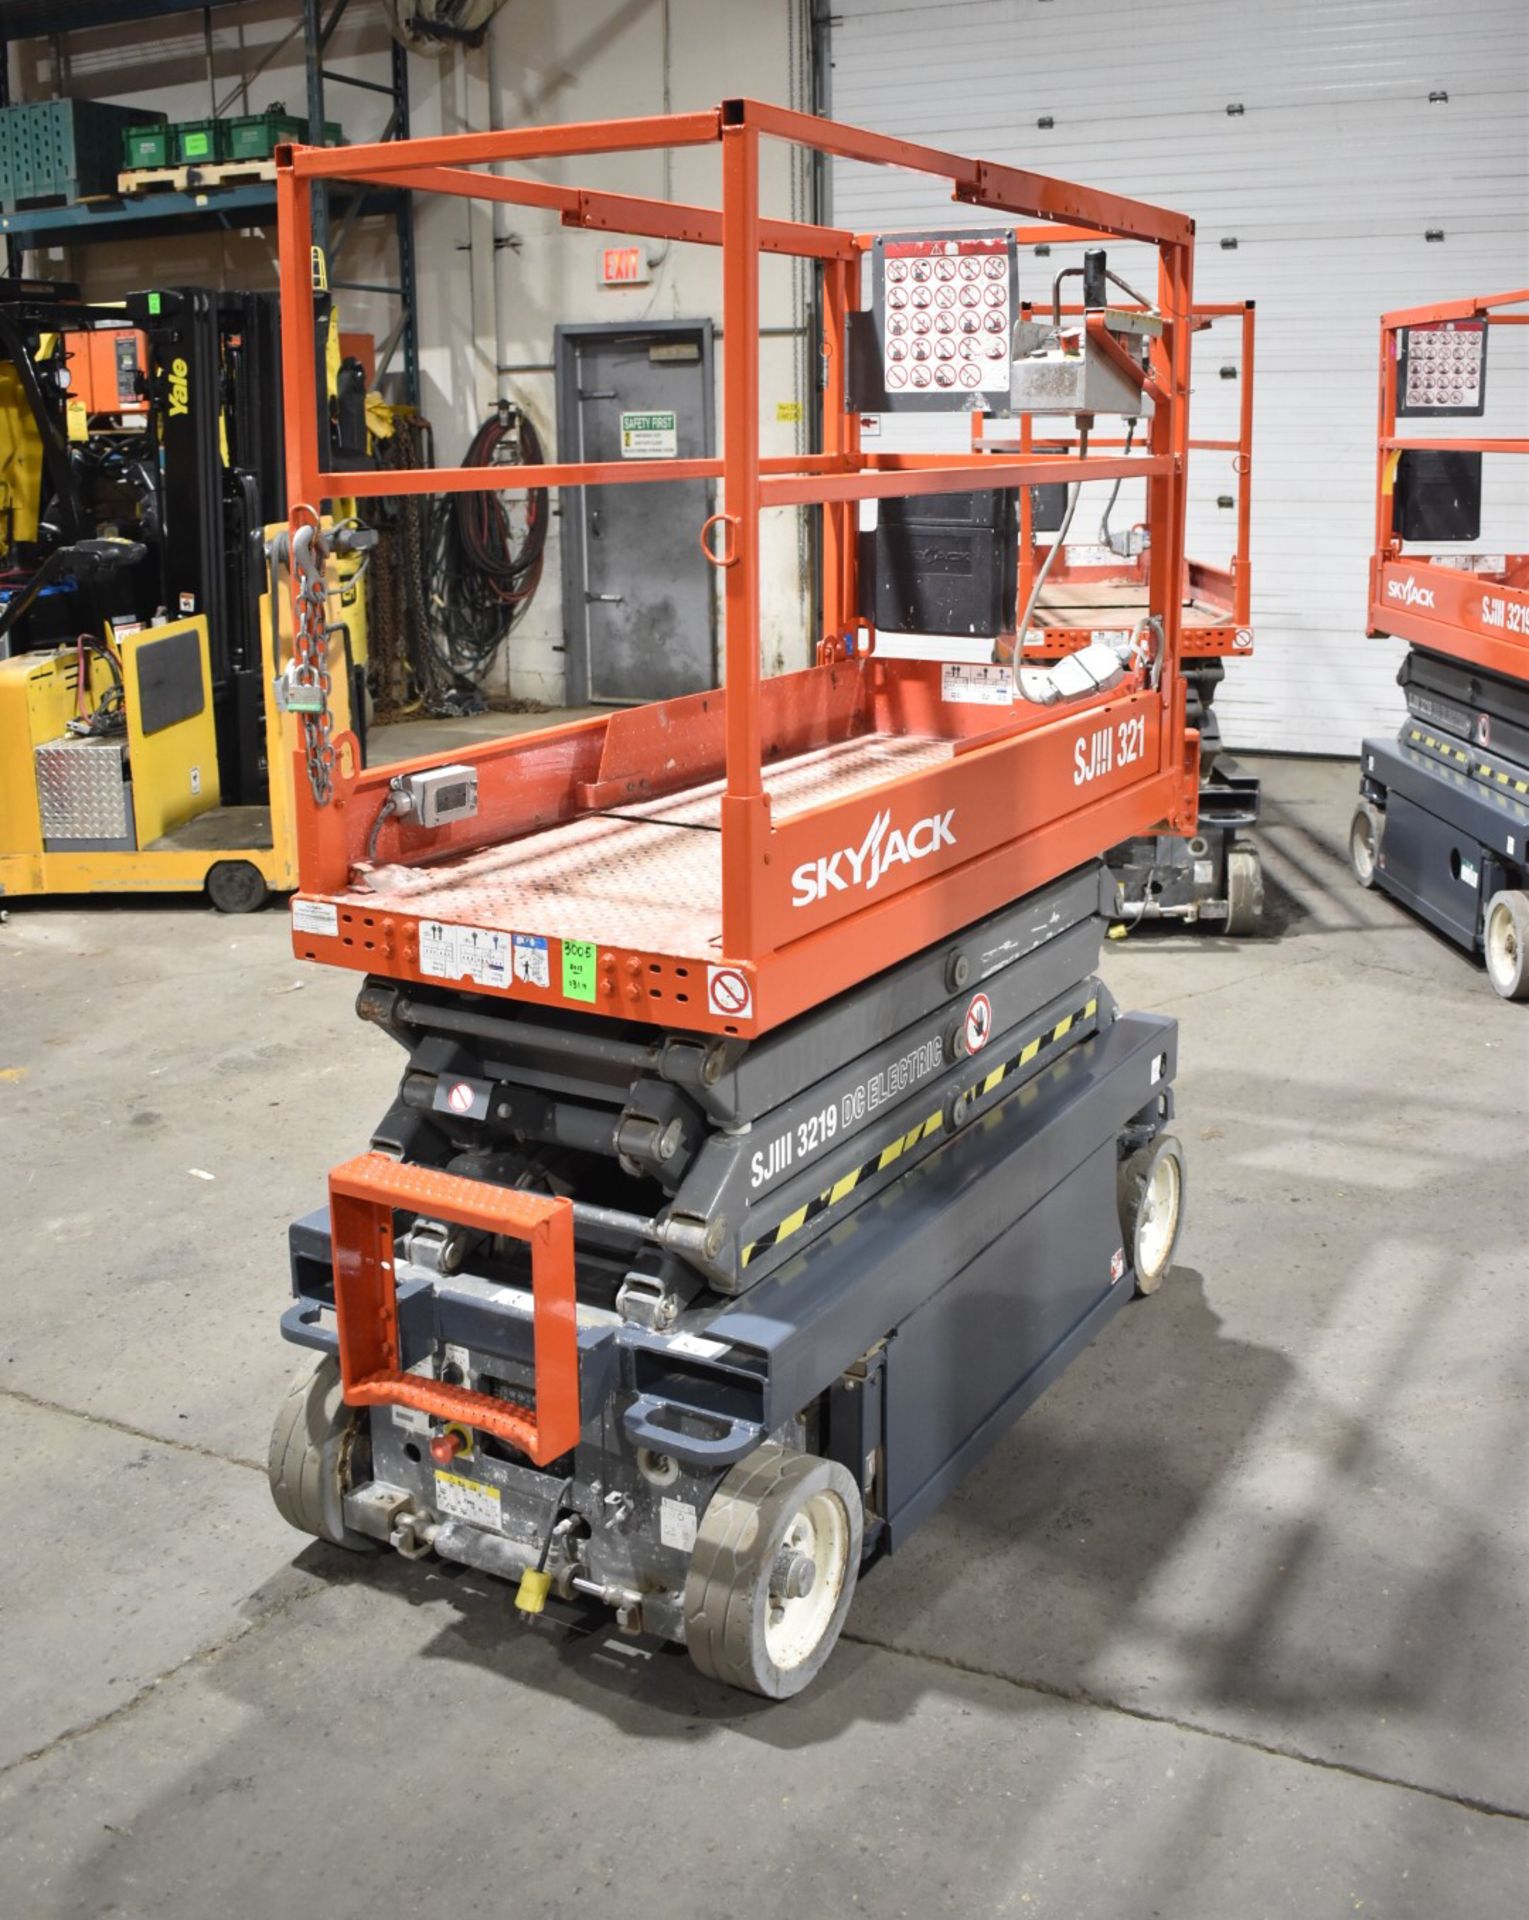 SKYJACK (2013) III 3219 ELECTRIC SCISSOR LIFT WITH 24V BATTERY, 550LBS CAPACITY, 19' MAX HEIGHT, - Image 5 of 8